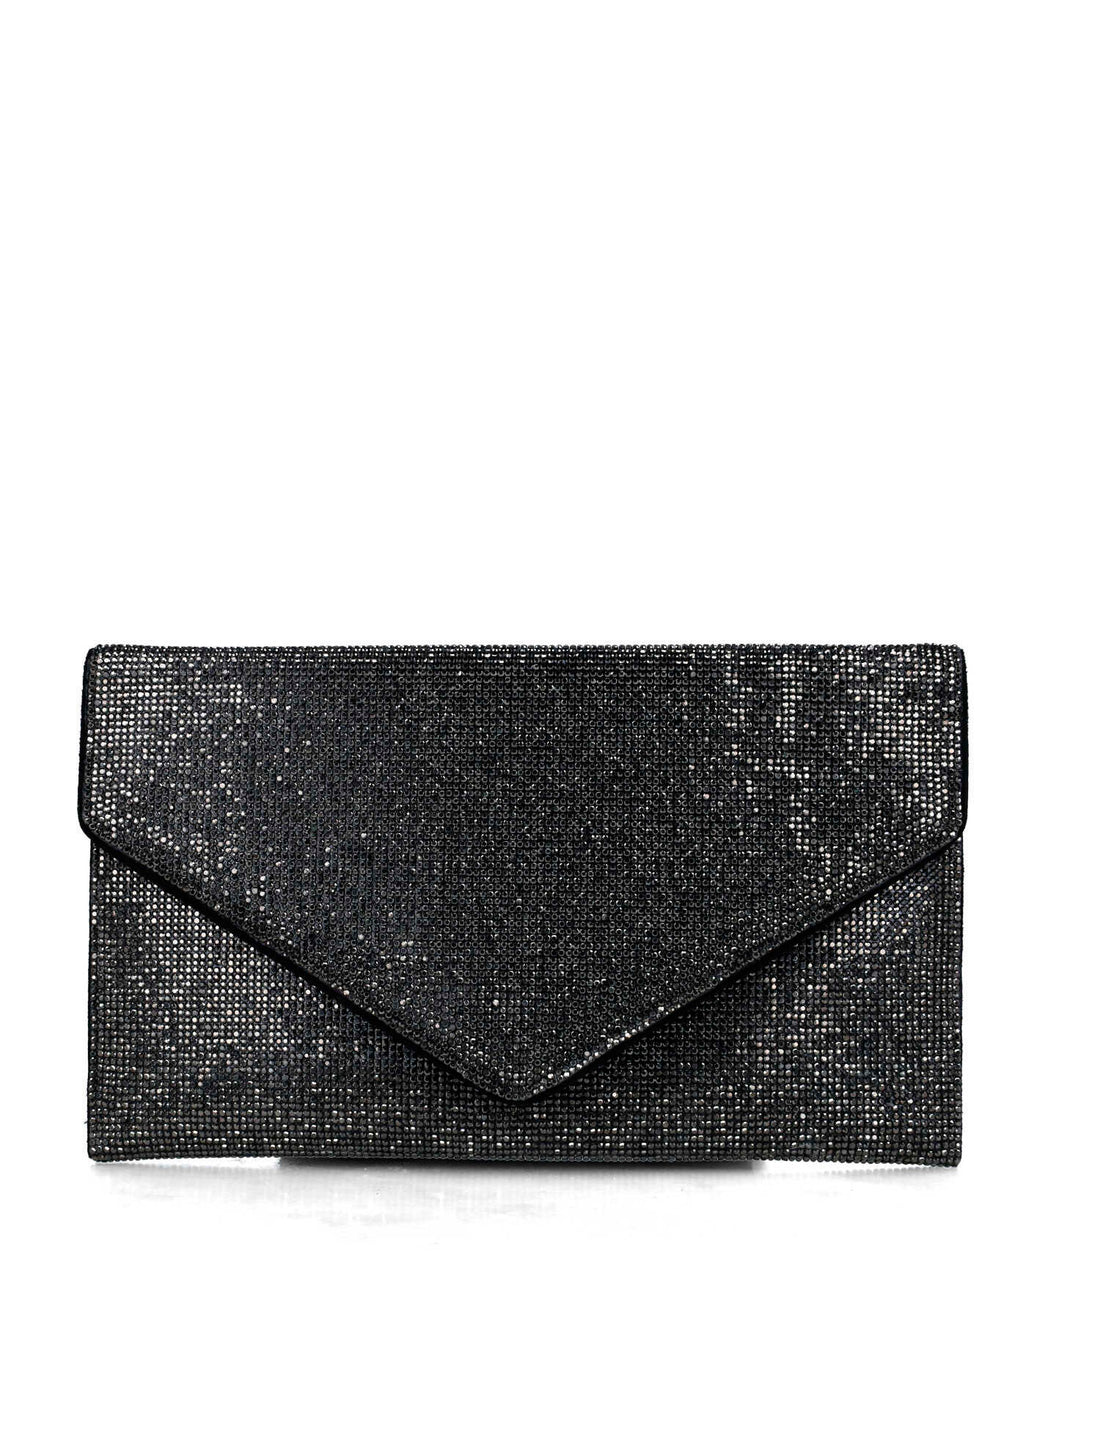 Black Clutch With All Over Embellishment_85611_01_01